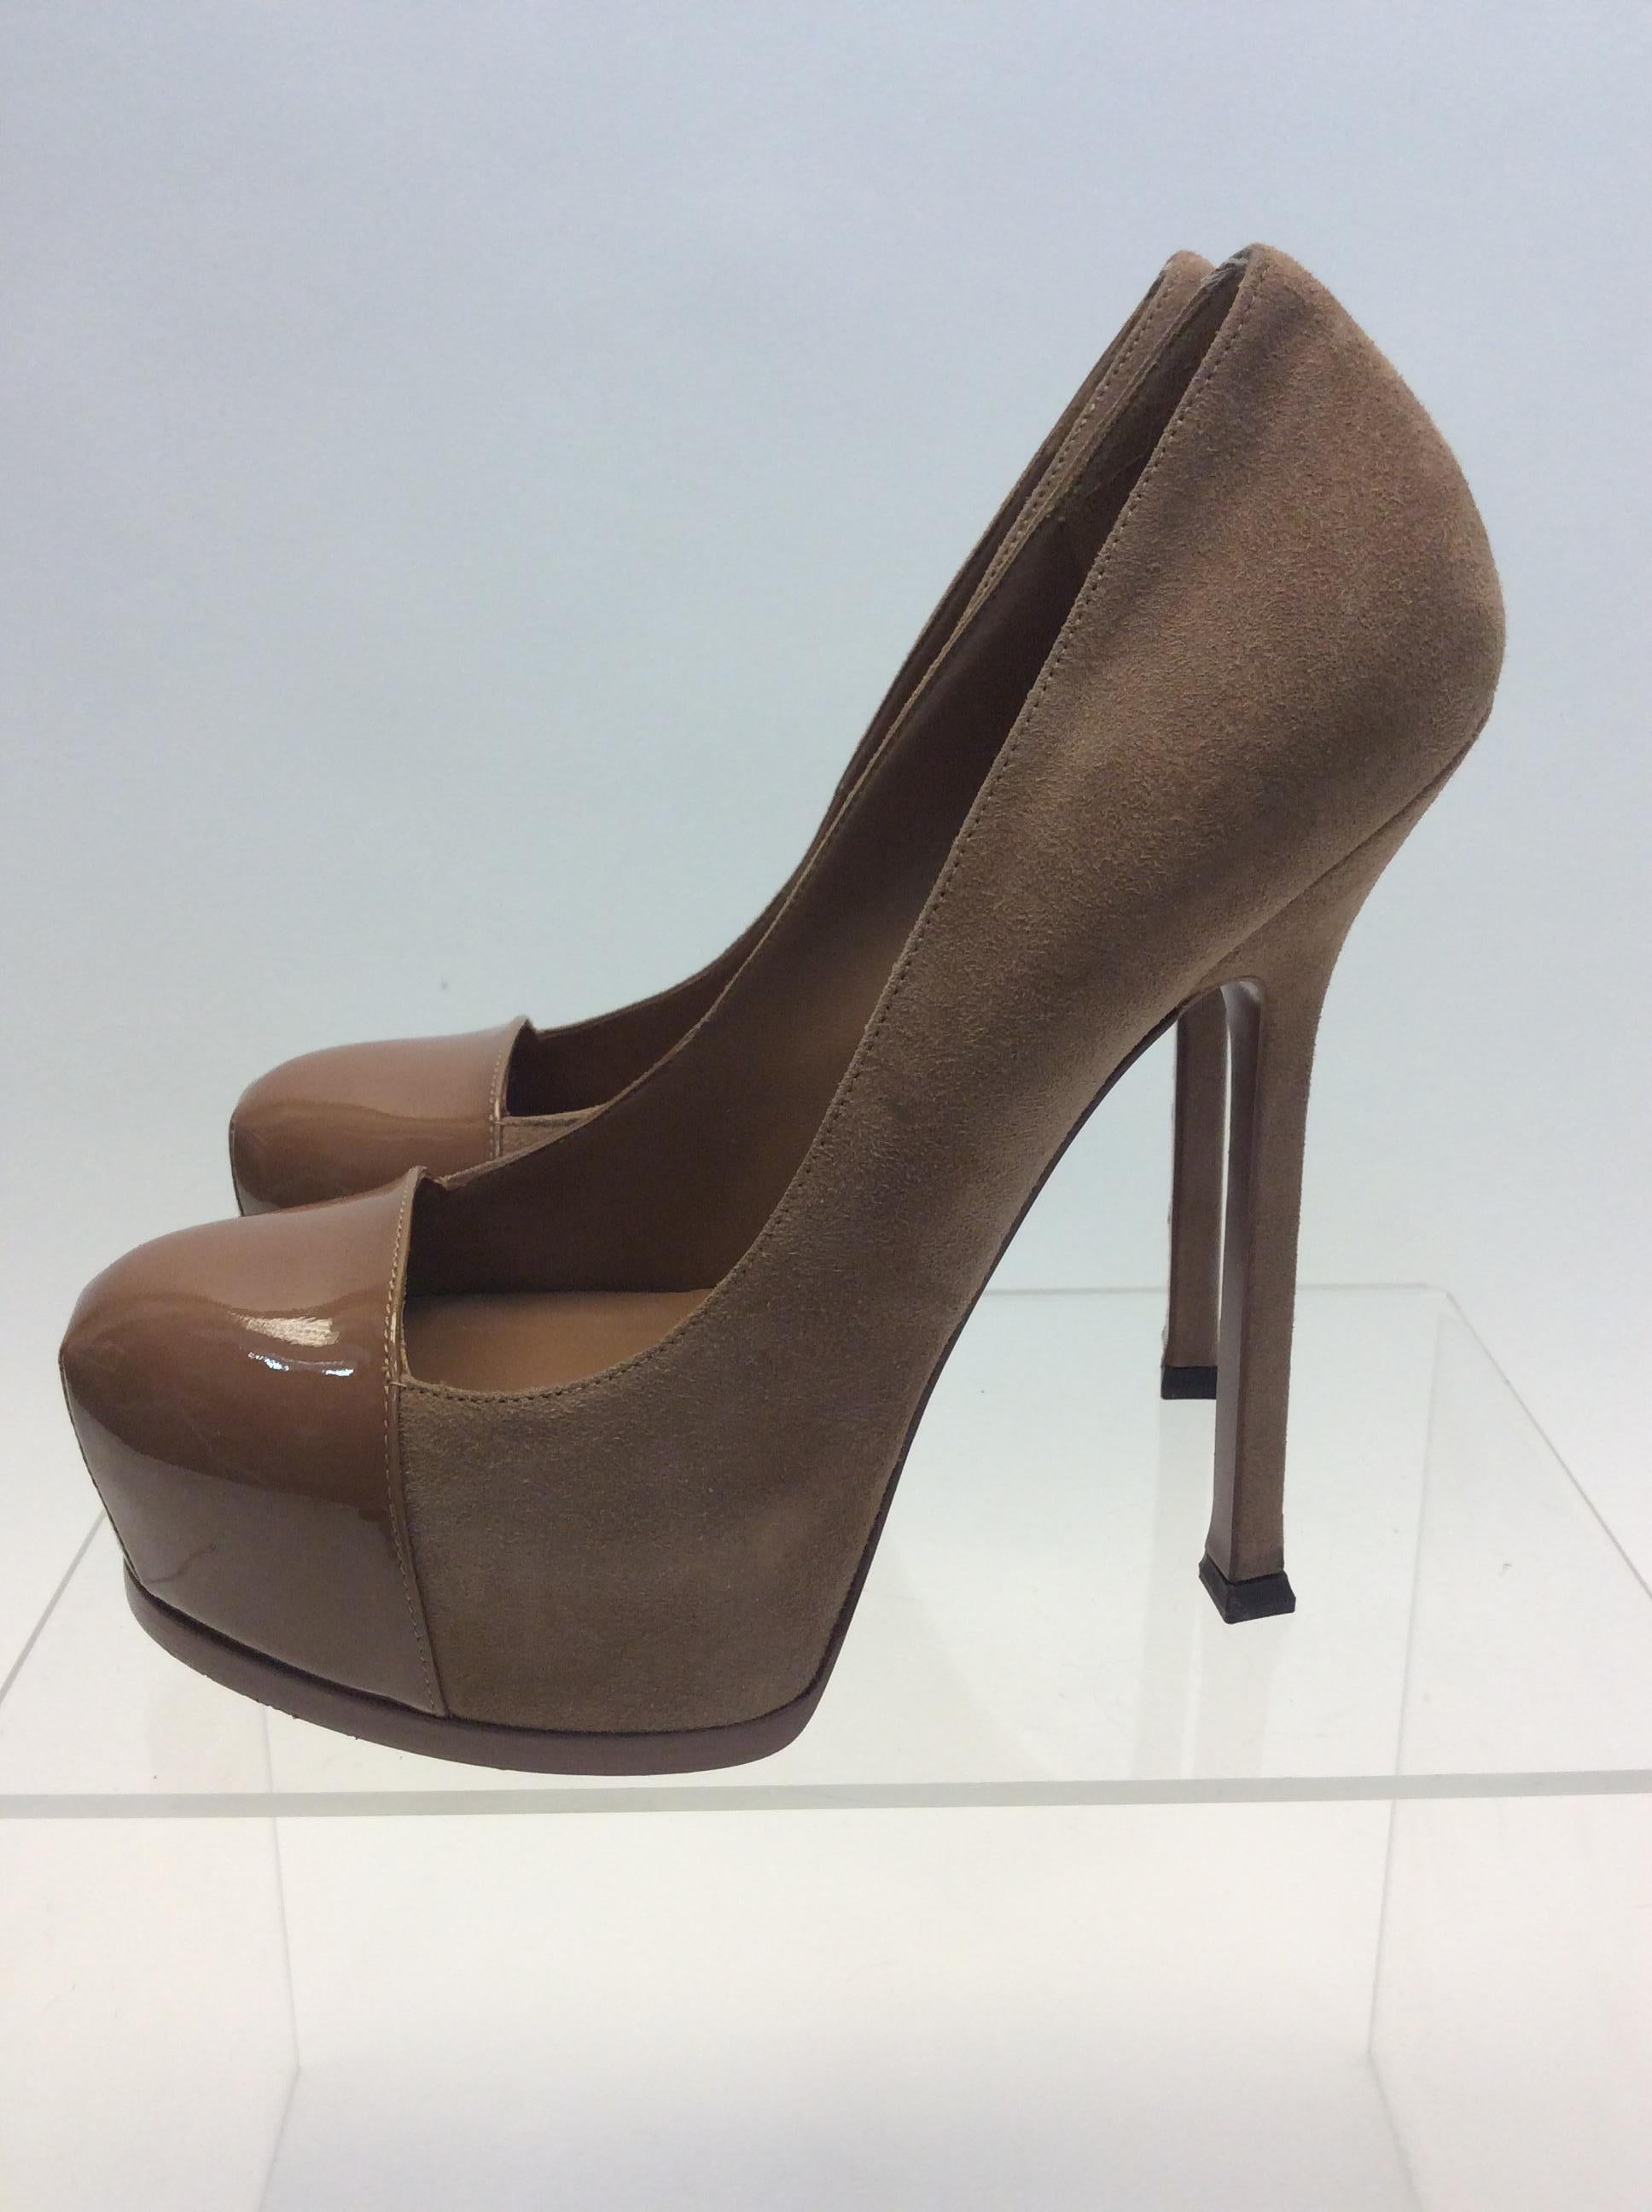 Yves Saint Laurent Nude Suede and Patent Leather Heels  (Schwarz) im Angebot